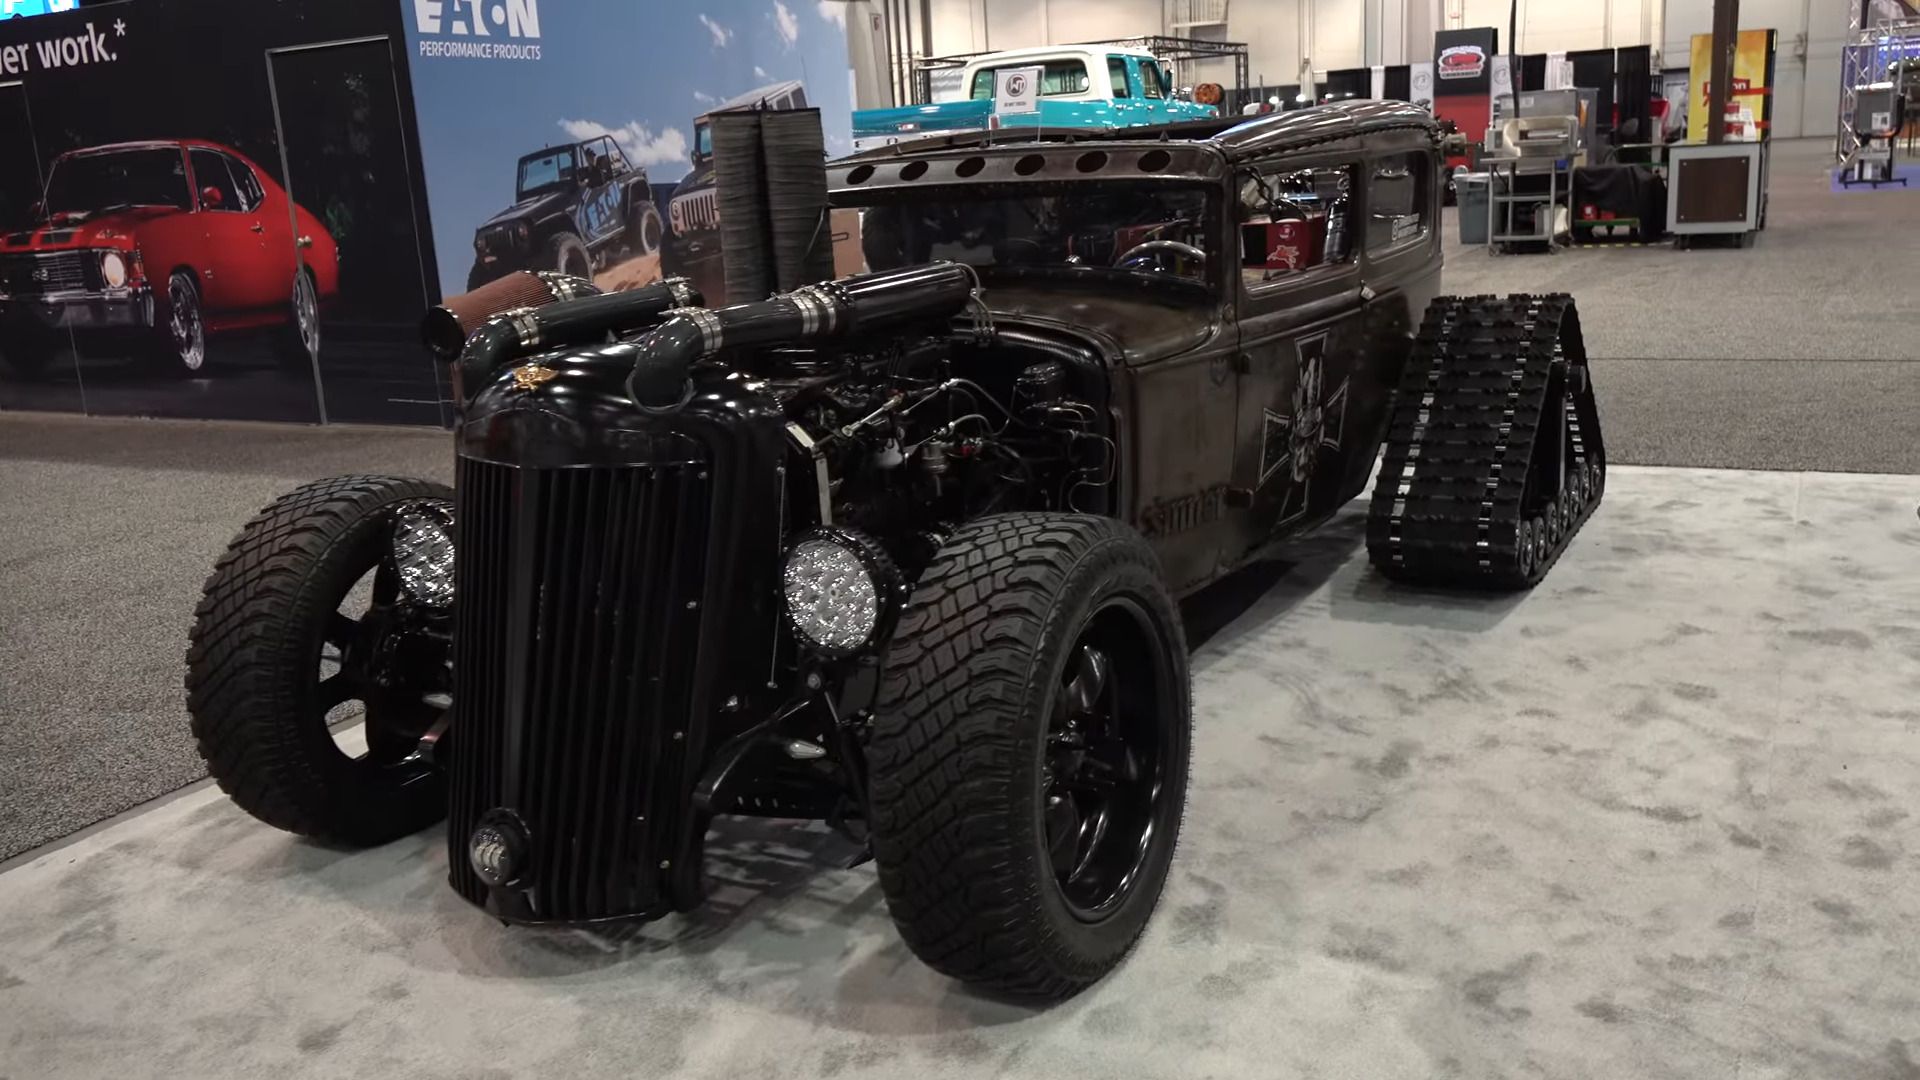 Sinners Rat Rod 1930 Ford With 5.9 Cummins Diesel And Half-Track Rear Hits Different